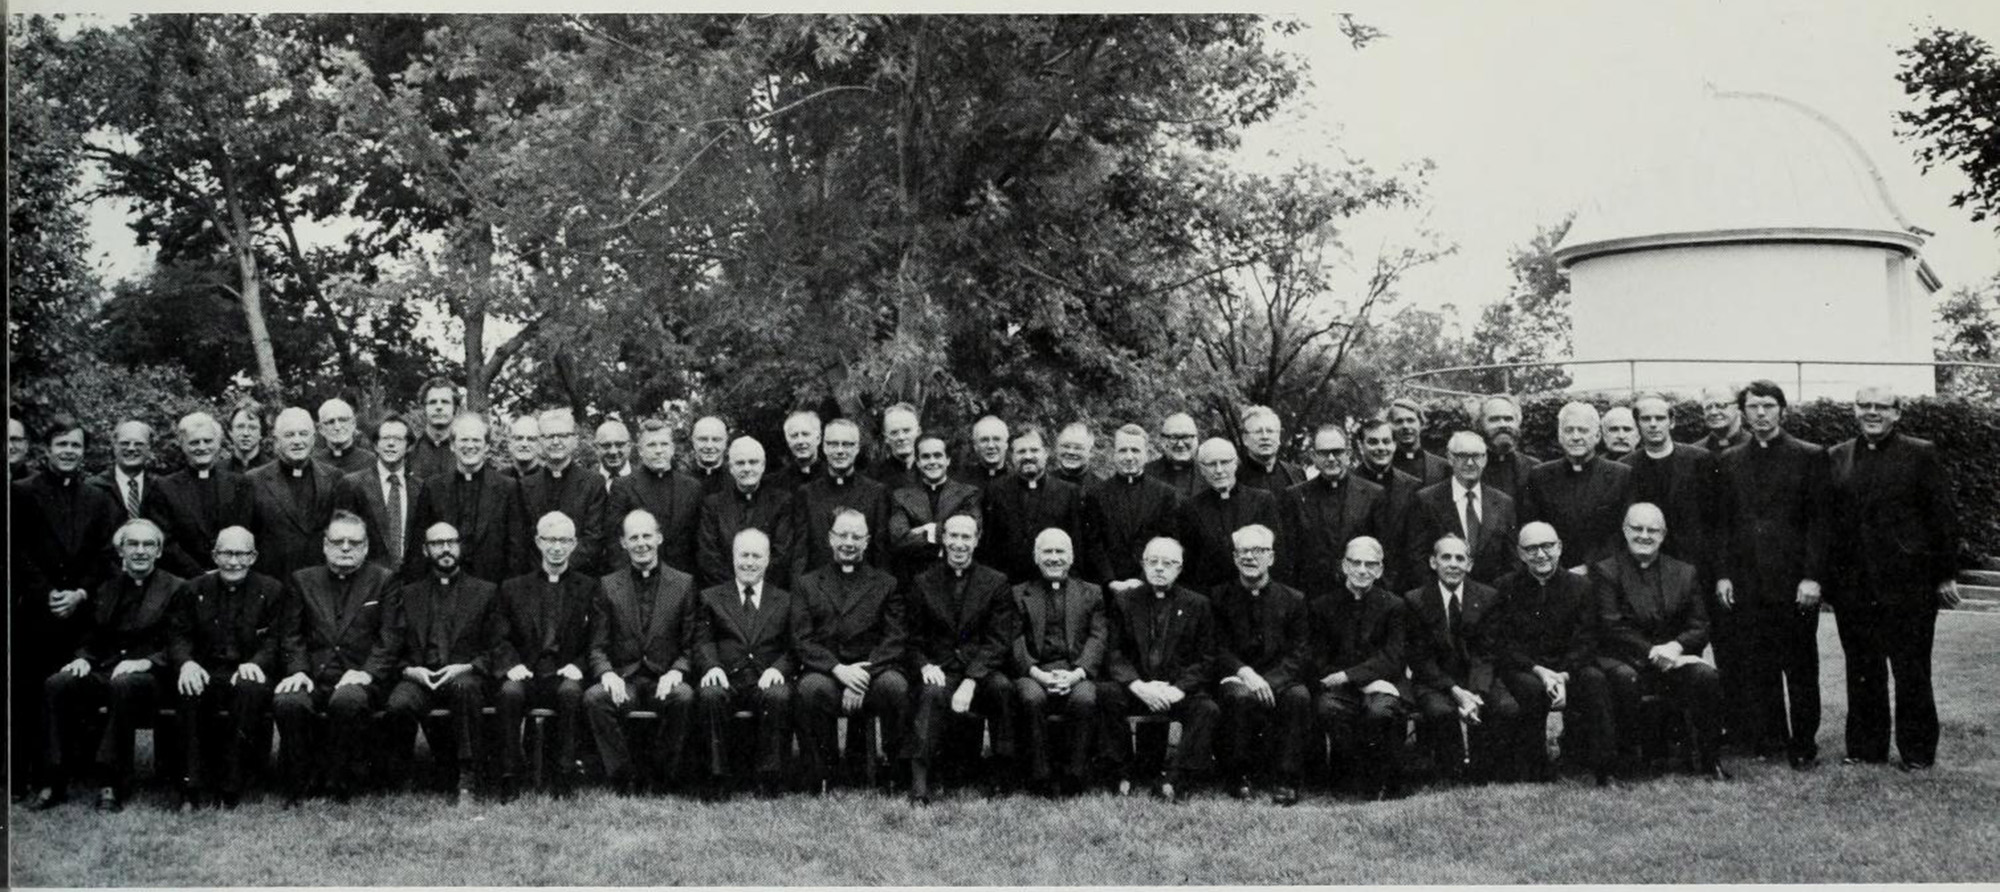 Image in 1980 of all Creighton Jesuits.